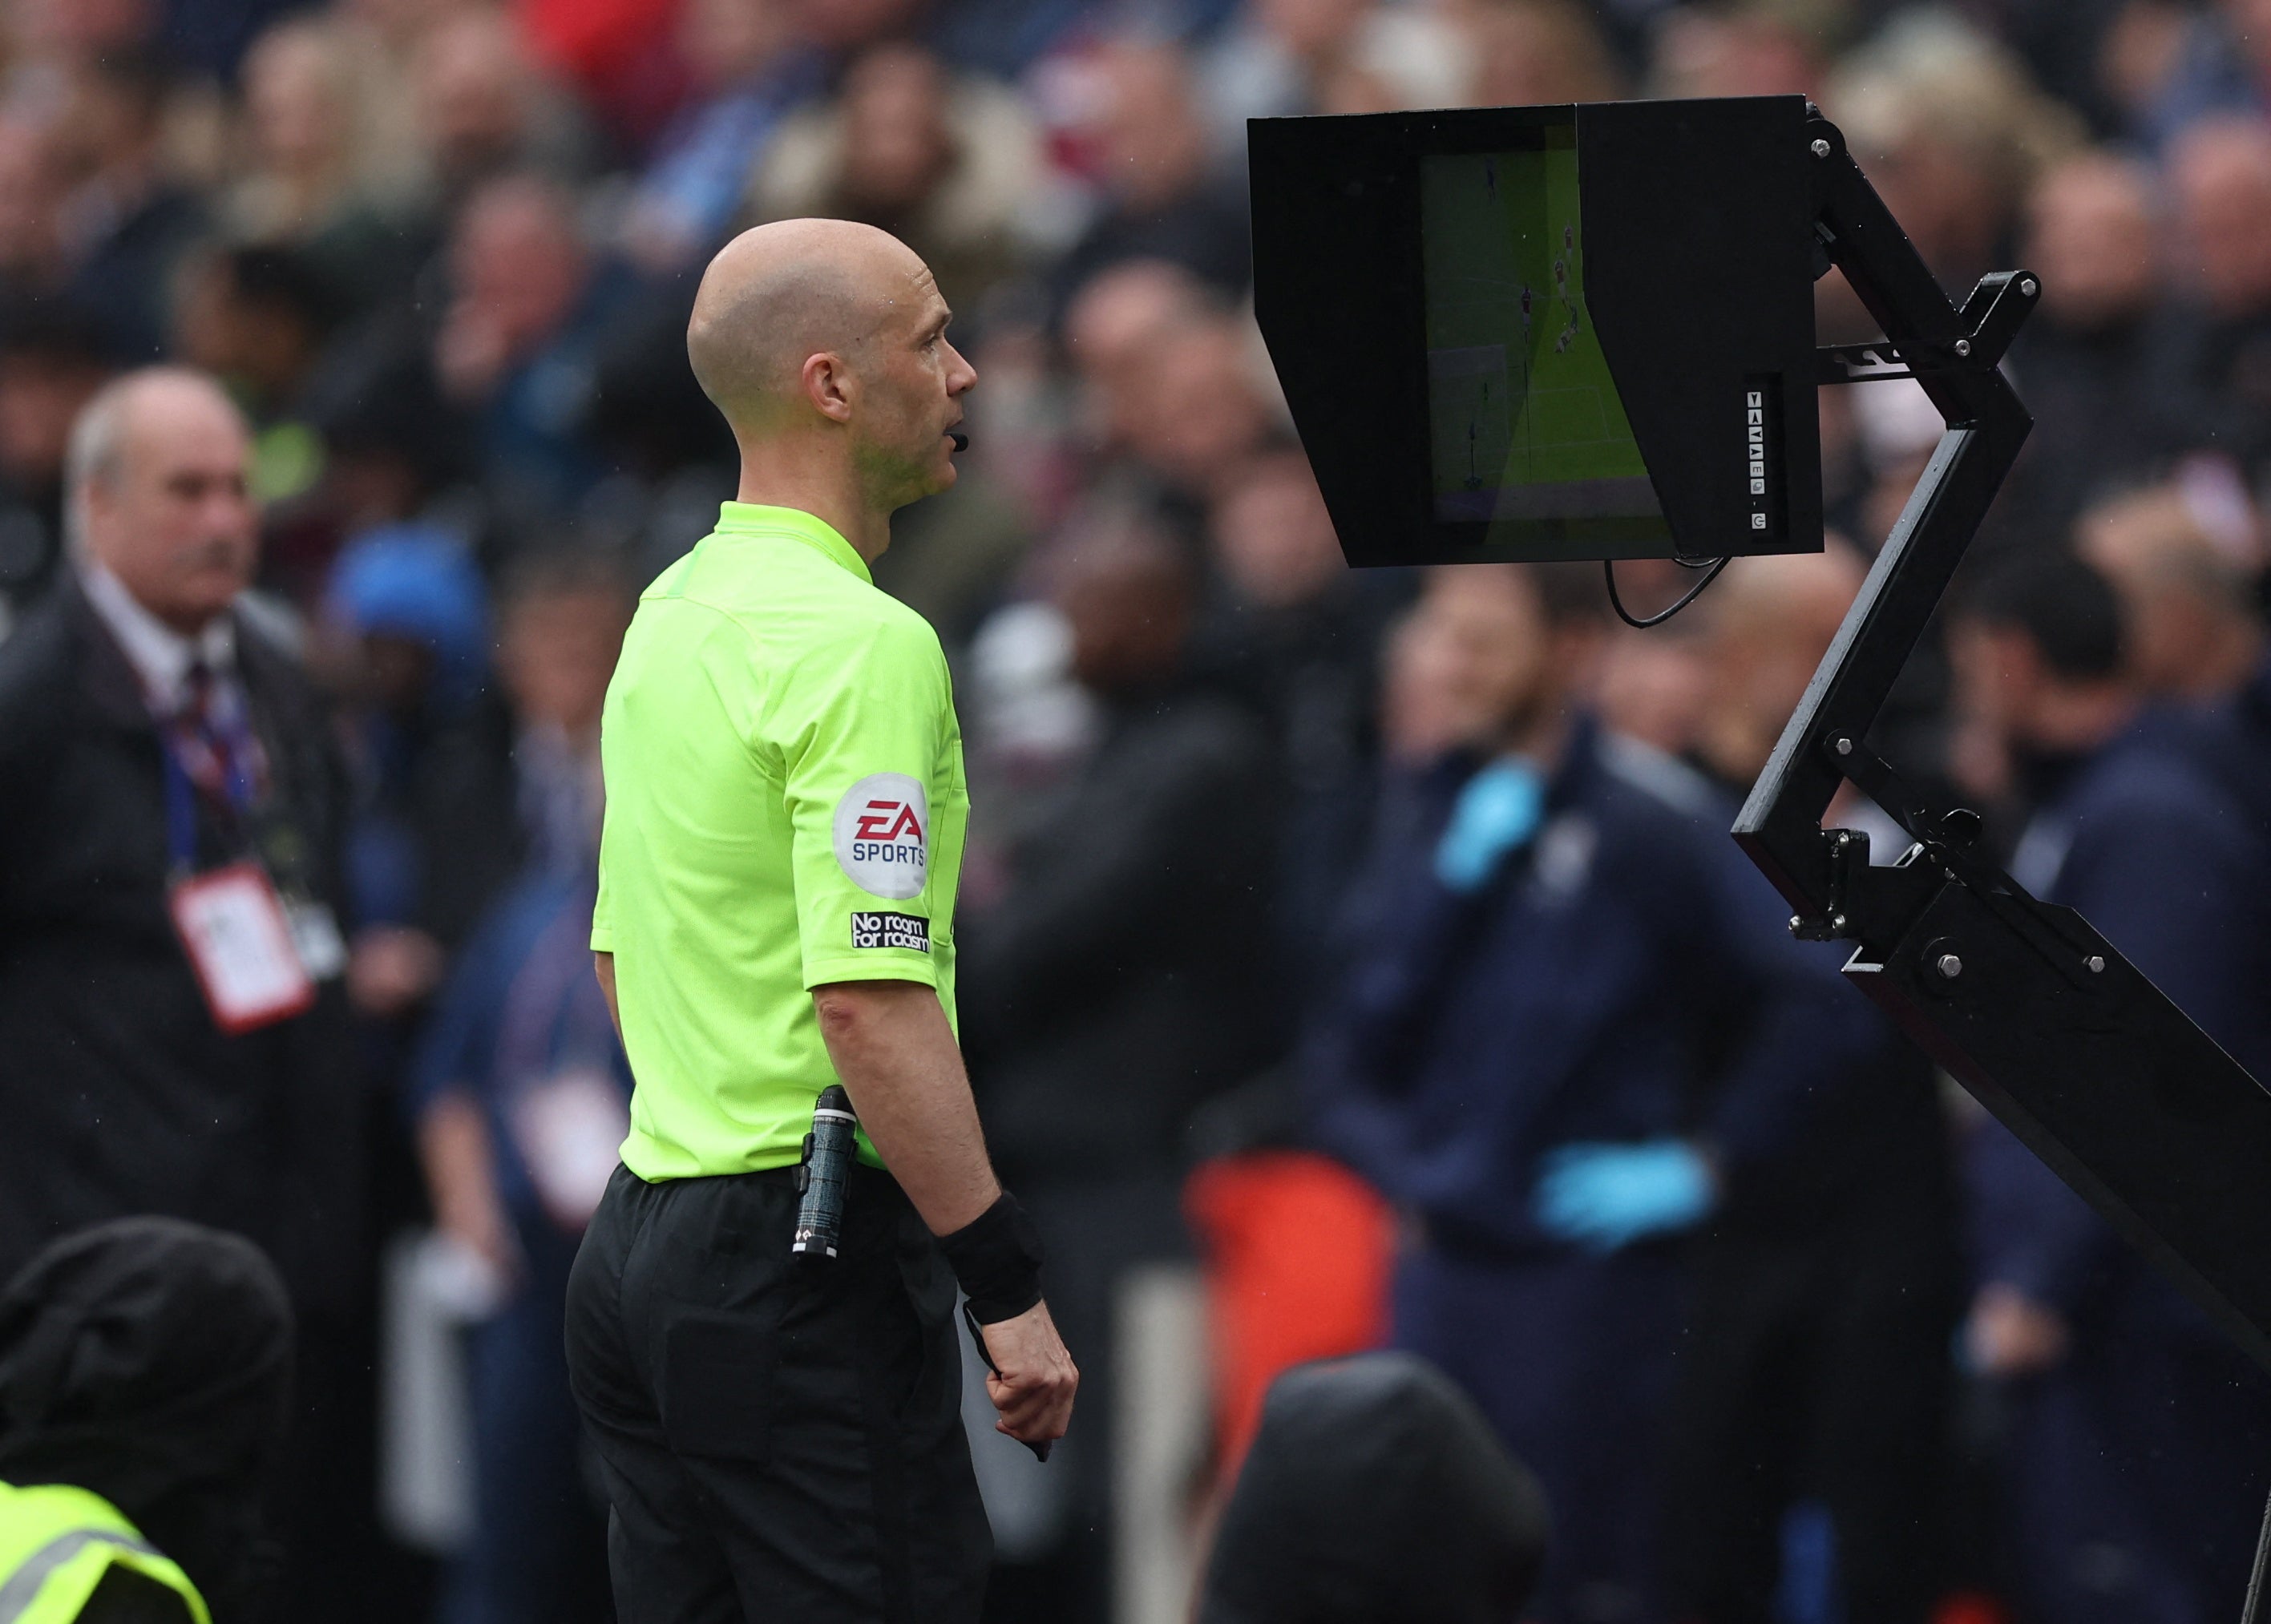 VAR was introduced to the Premier League for the 2019/20 season